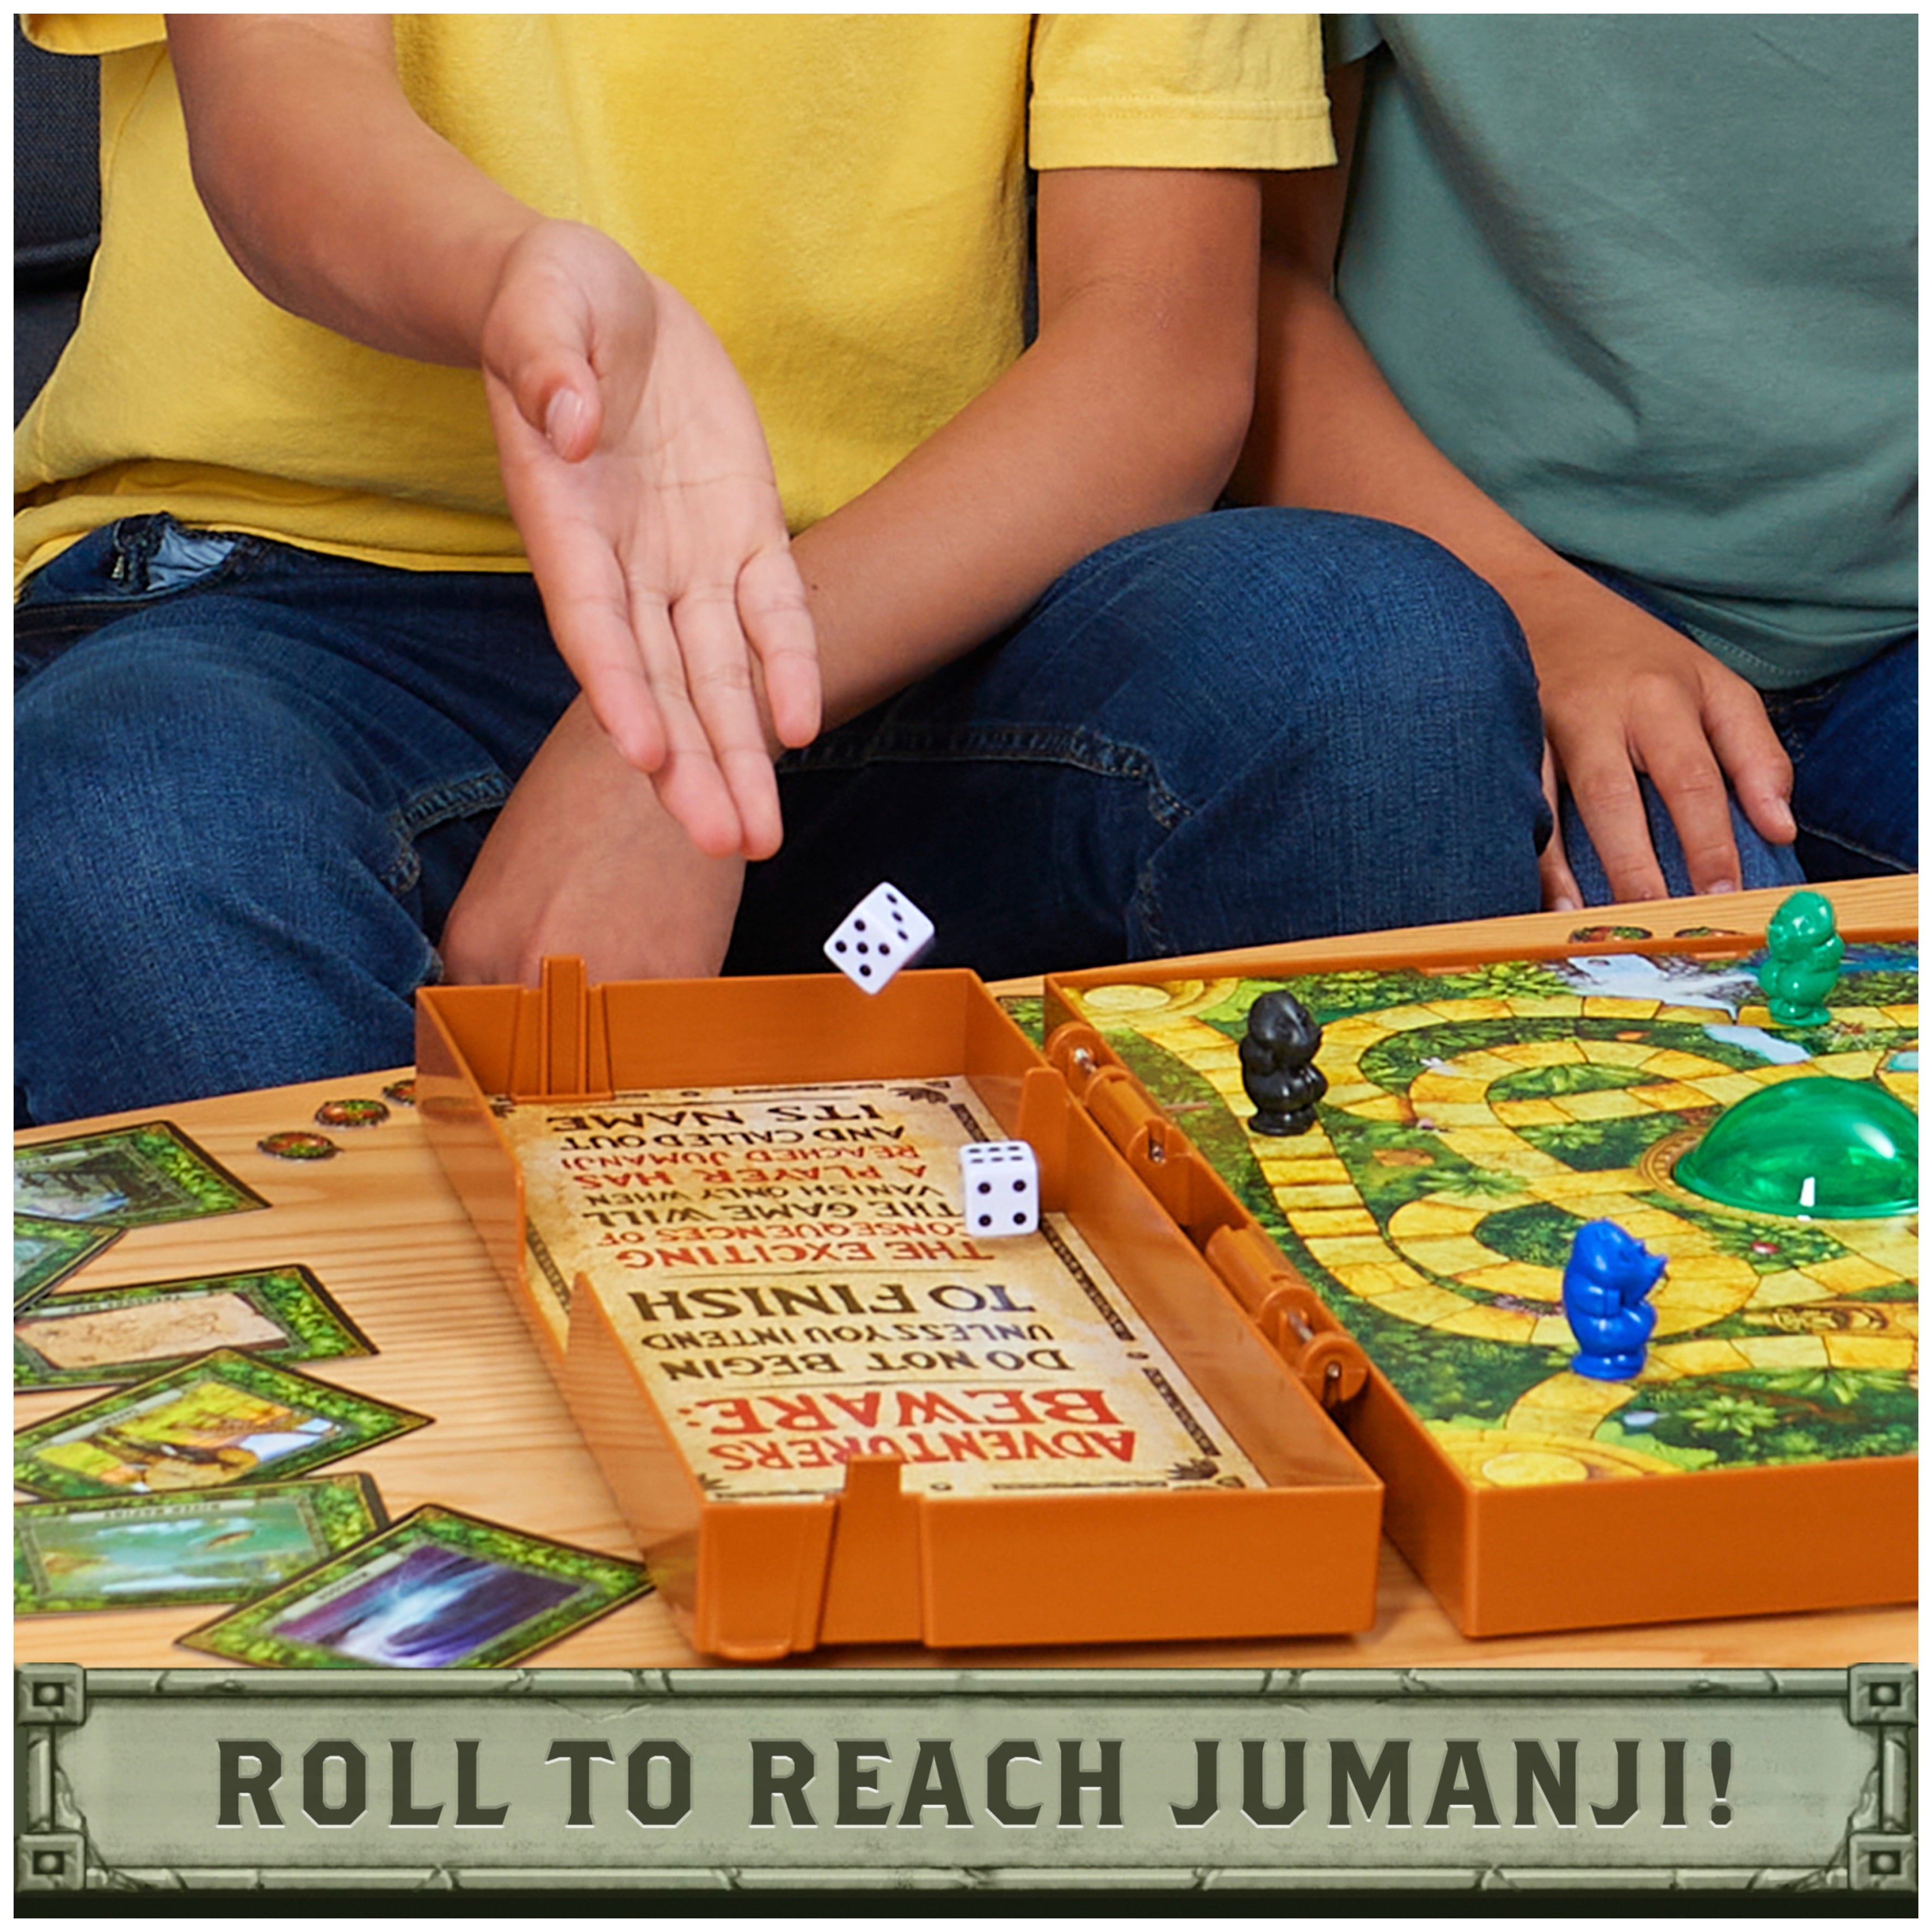 Jumanji Original Board Game One of the best selling games this year 